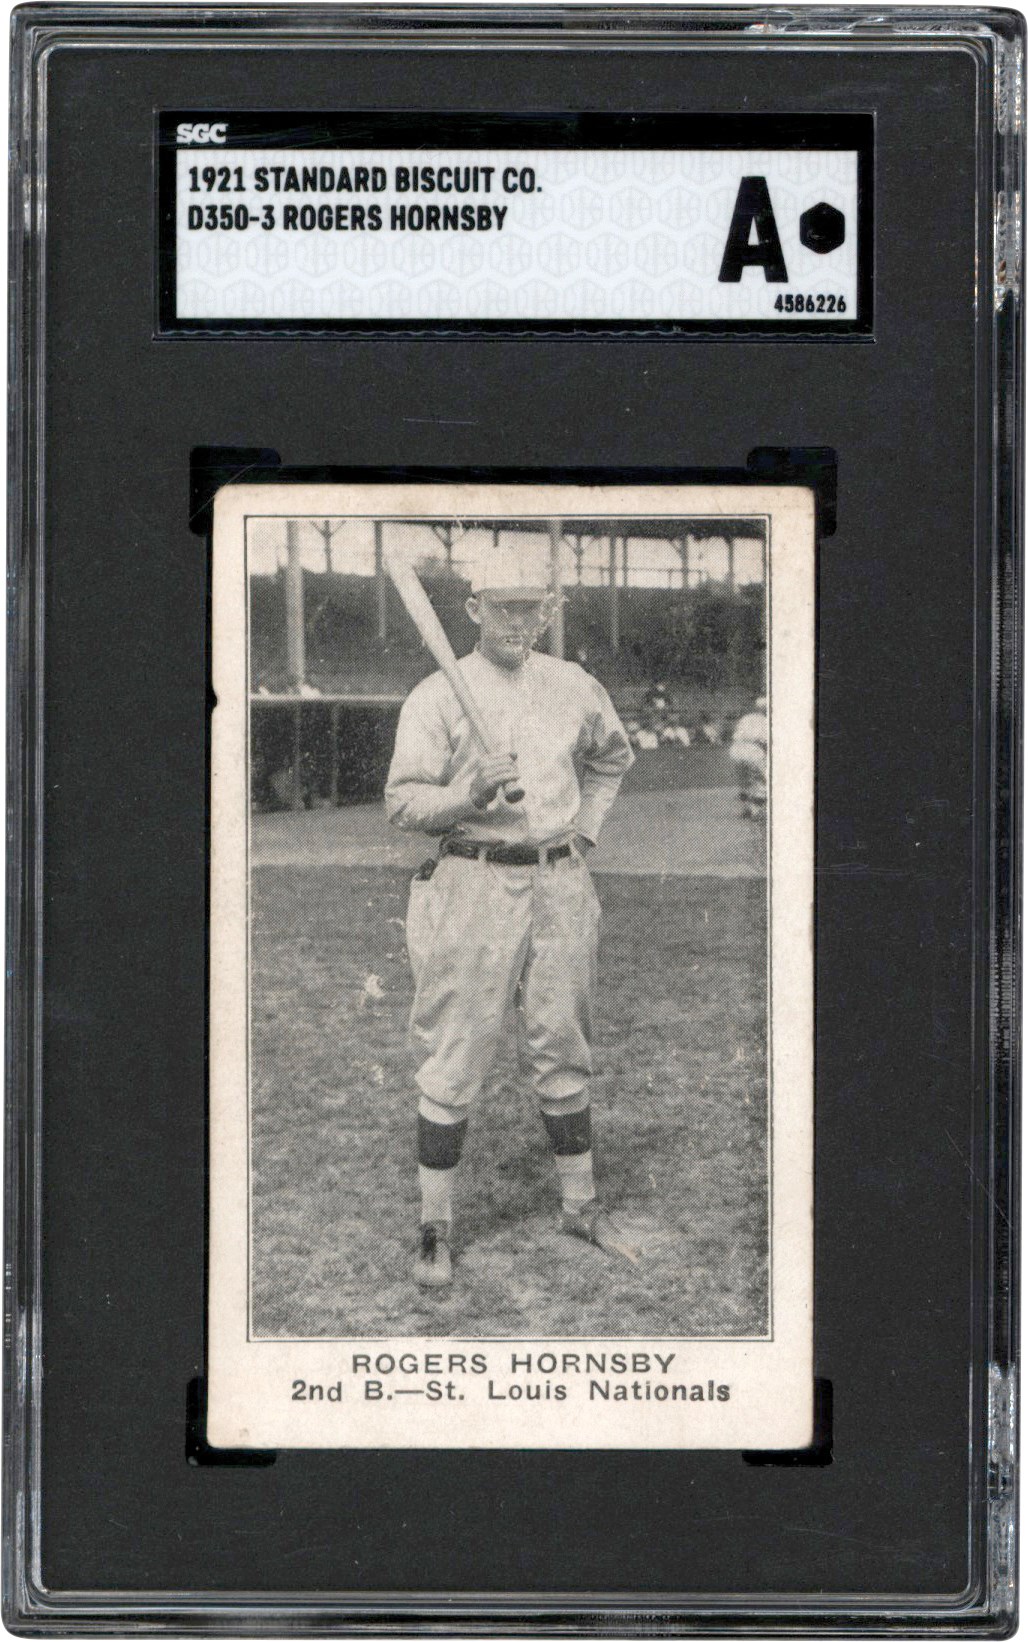 - 921 D350-3 Standard Biscuit Rogers Hornsby SGC Authentic